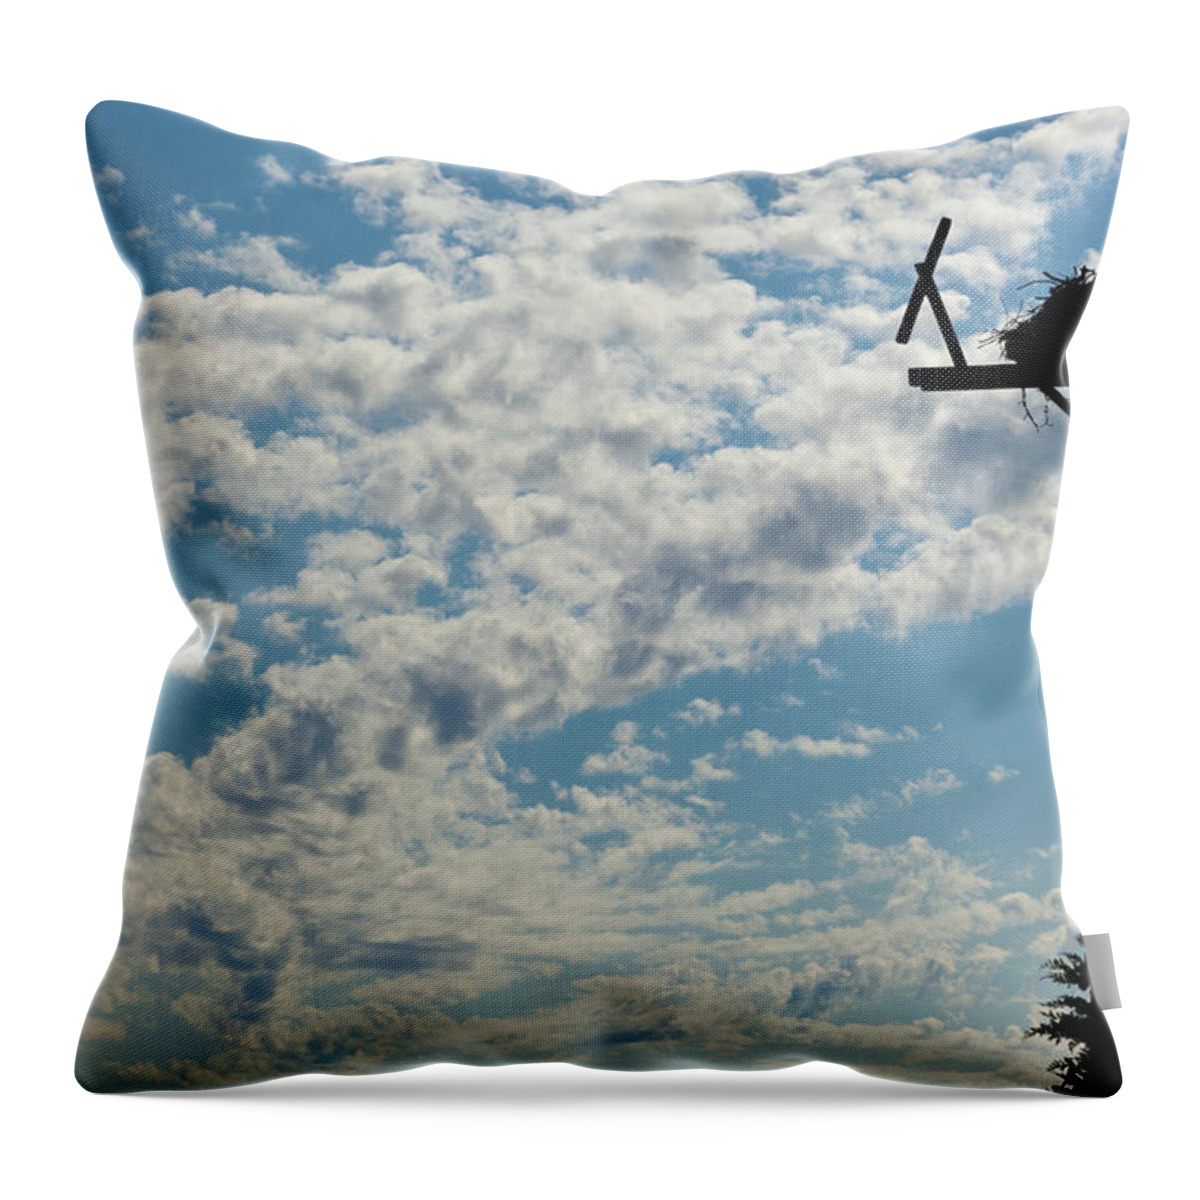 Osprey Throw Pillow featuring the photograph Osprey Nest by Michelle Constantine